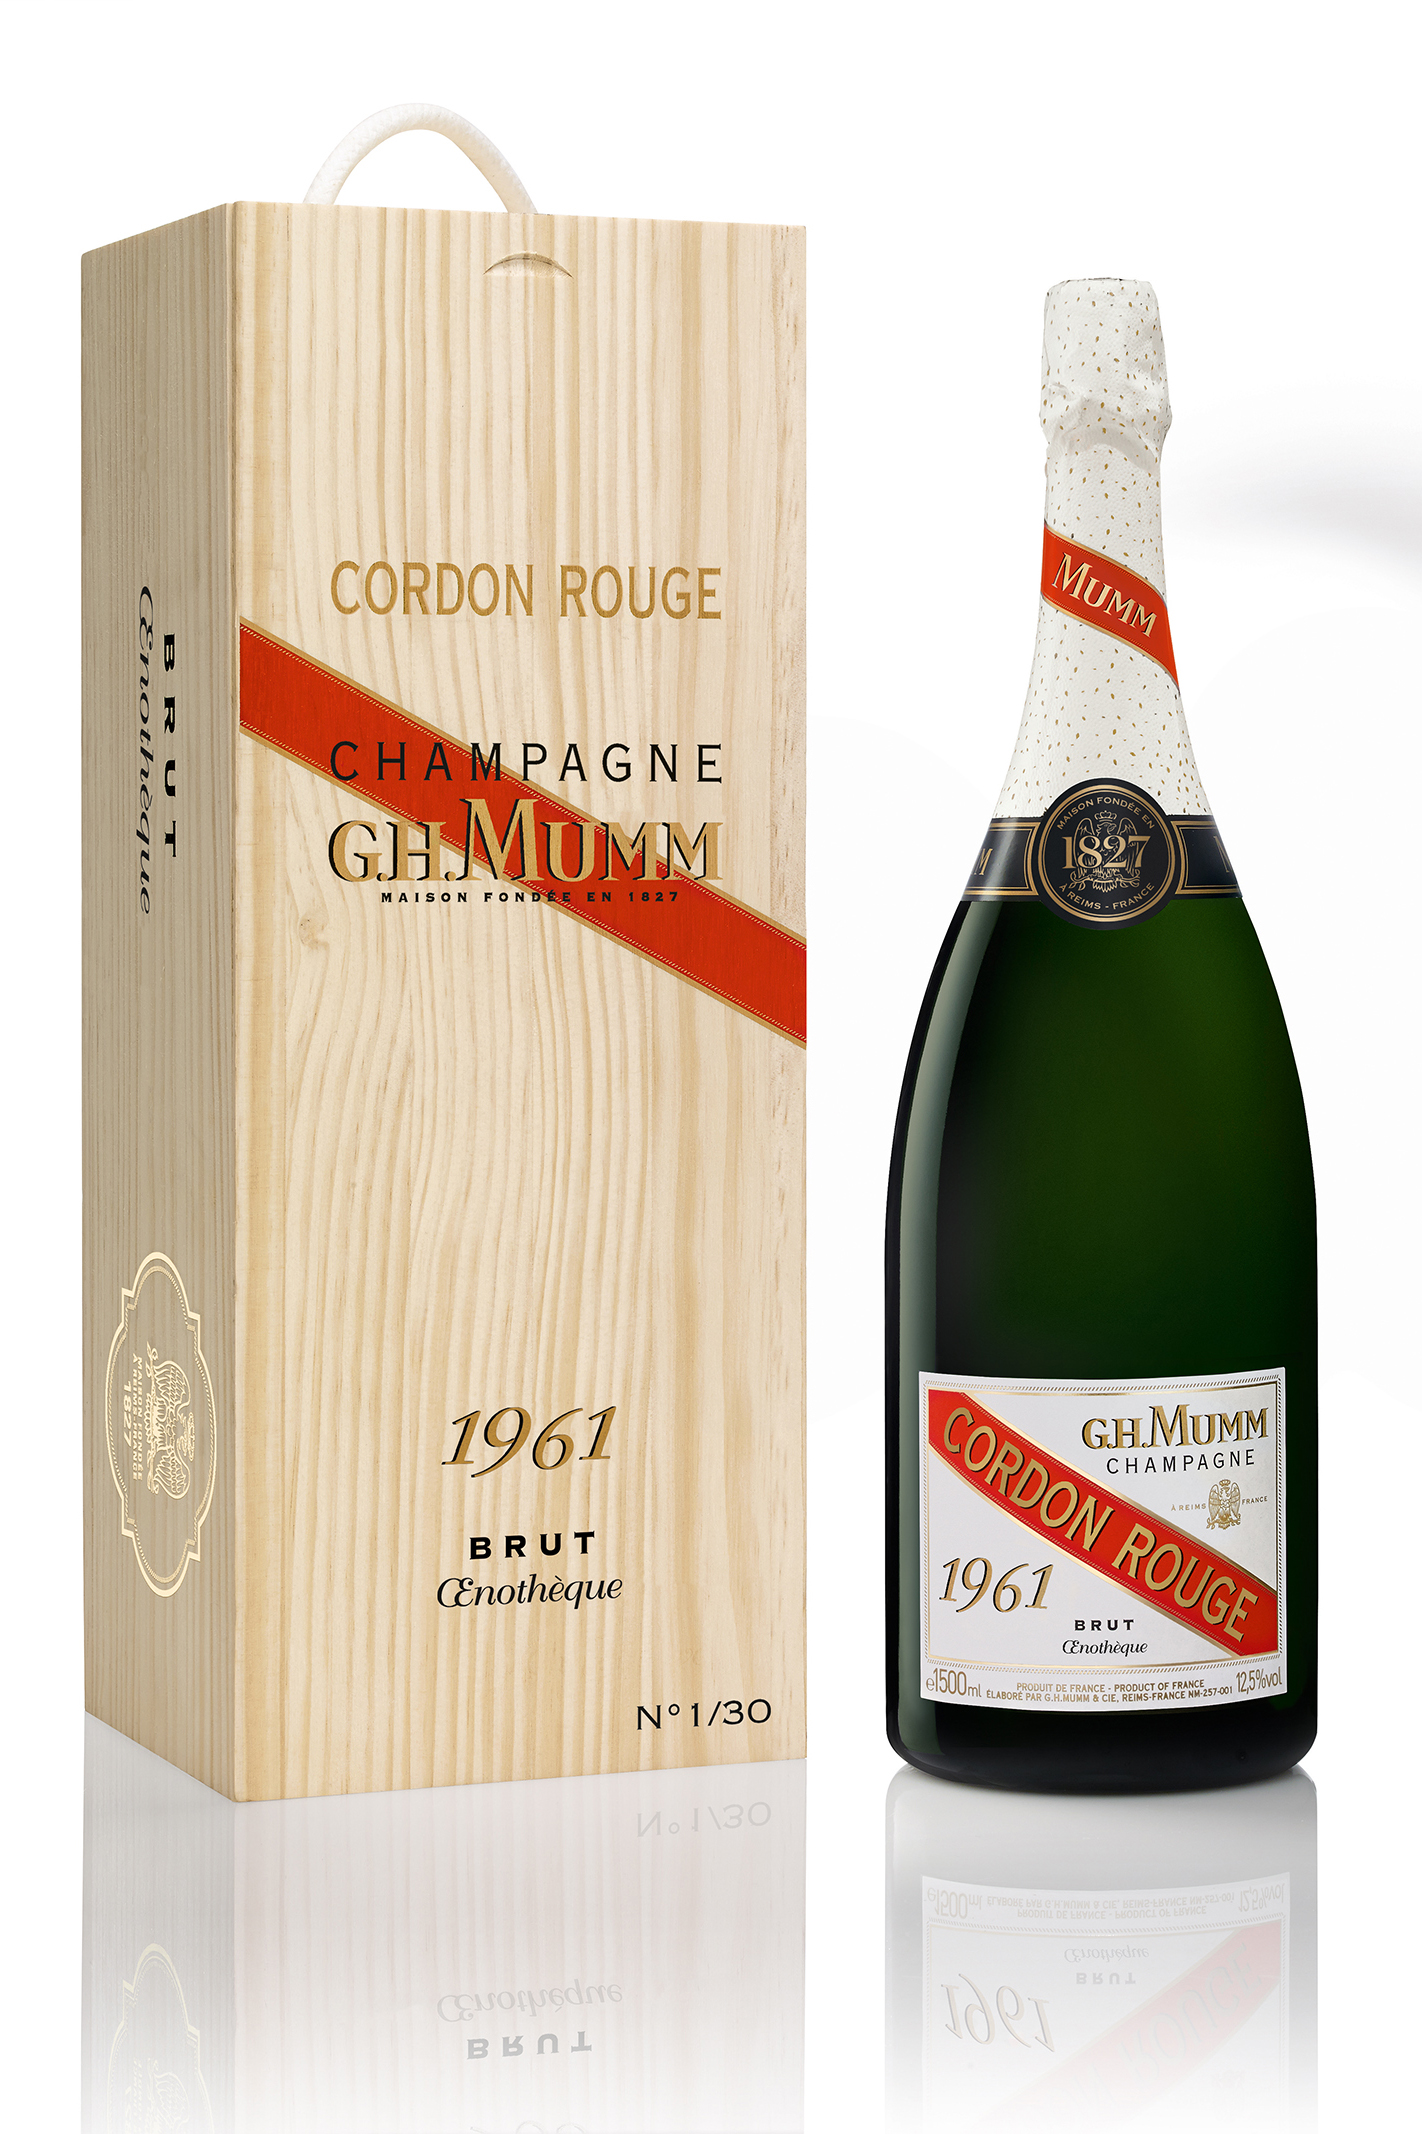 Mumm Cordon Rouge Stellar first champagne bottle designed for space